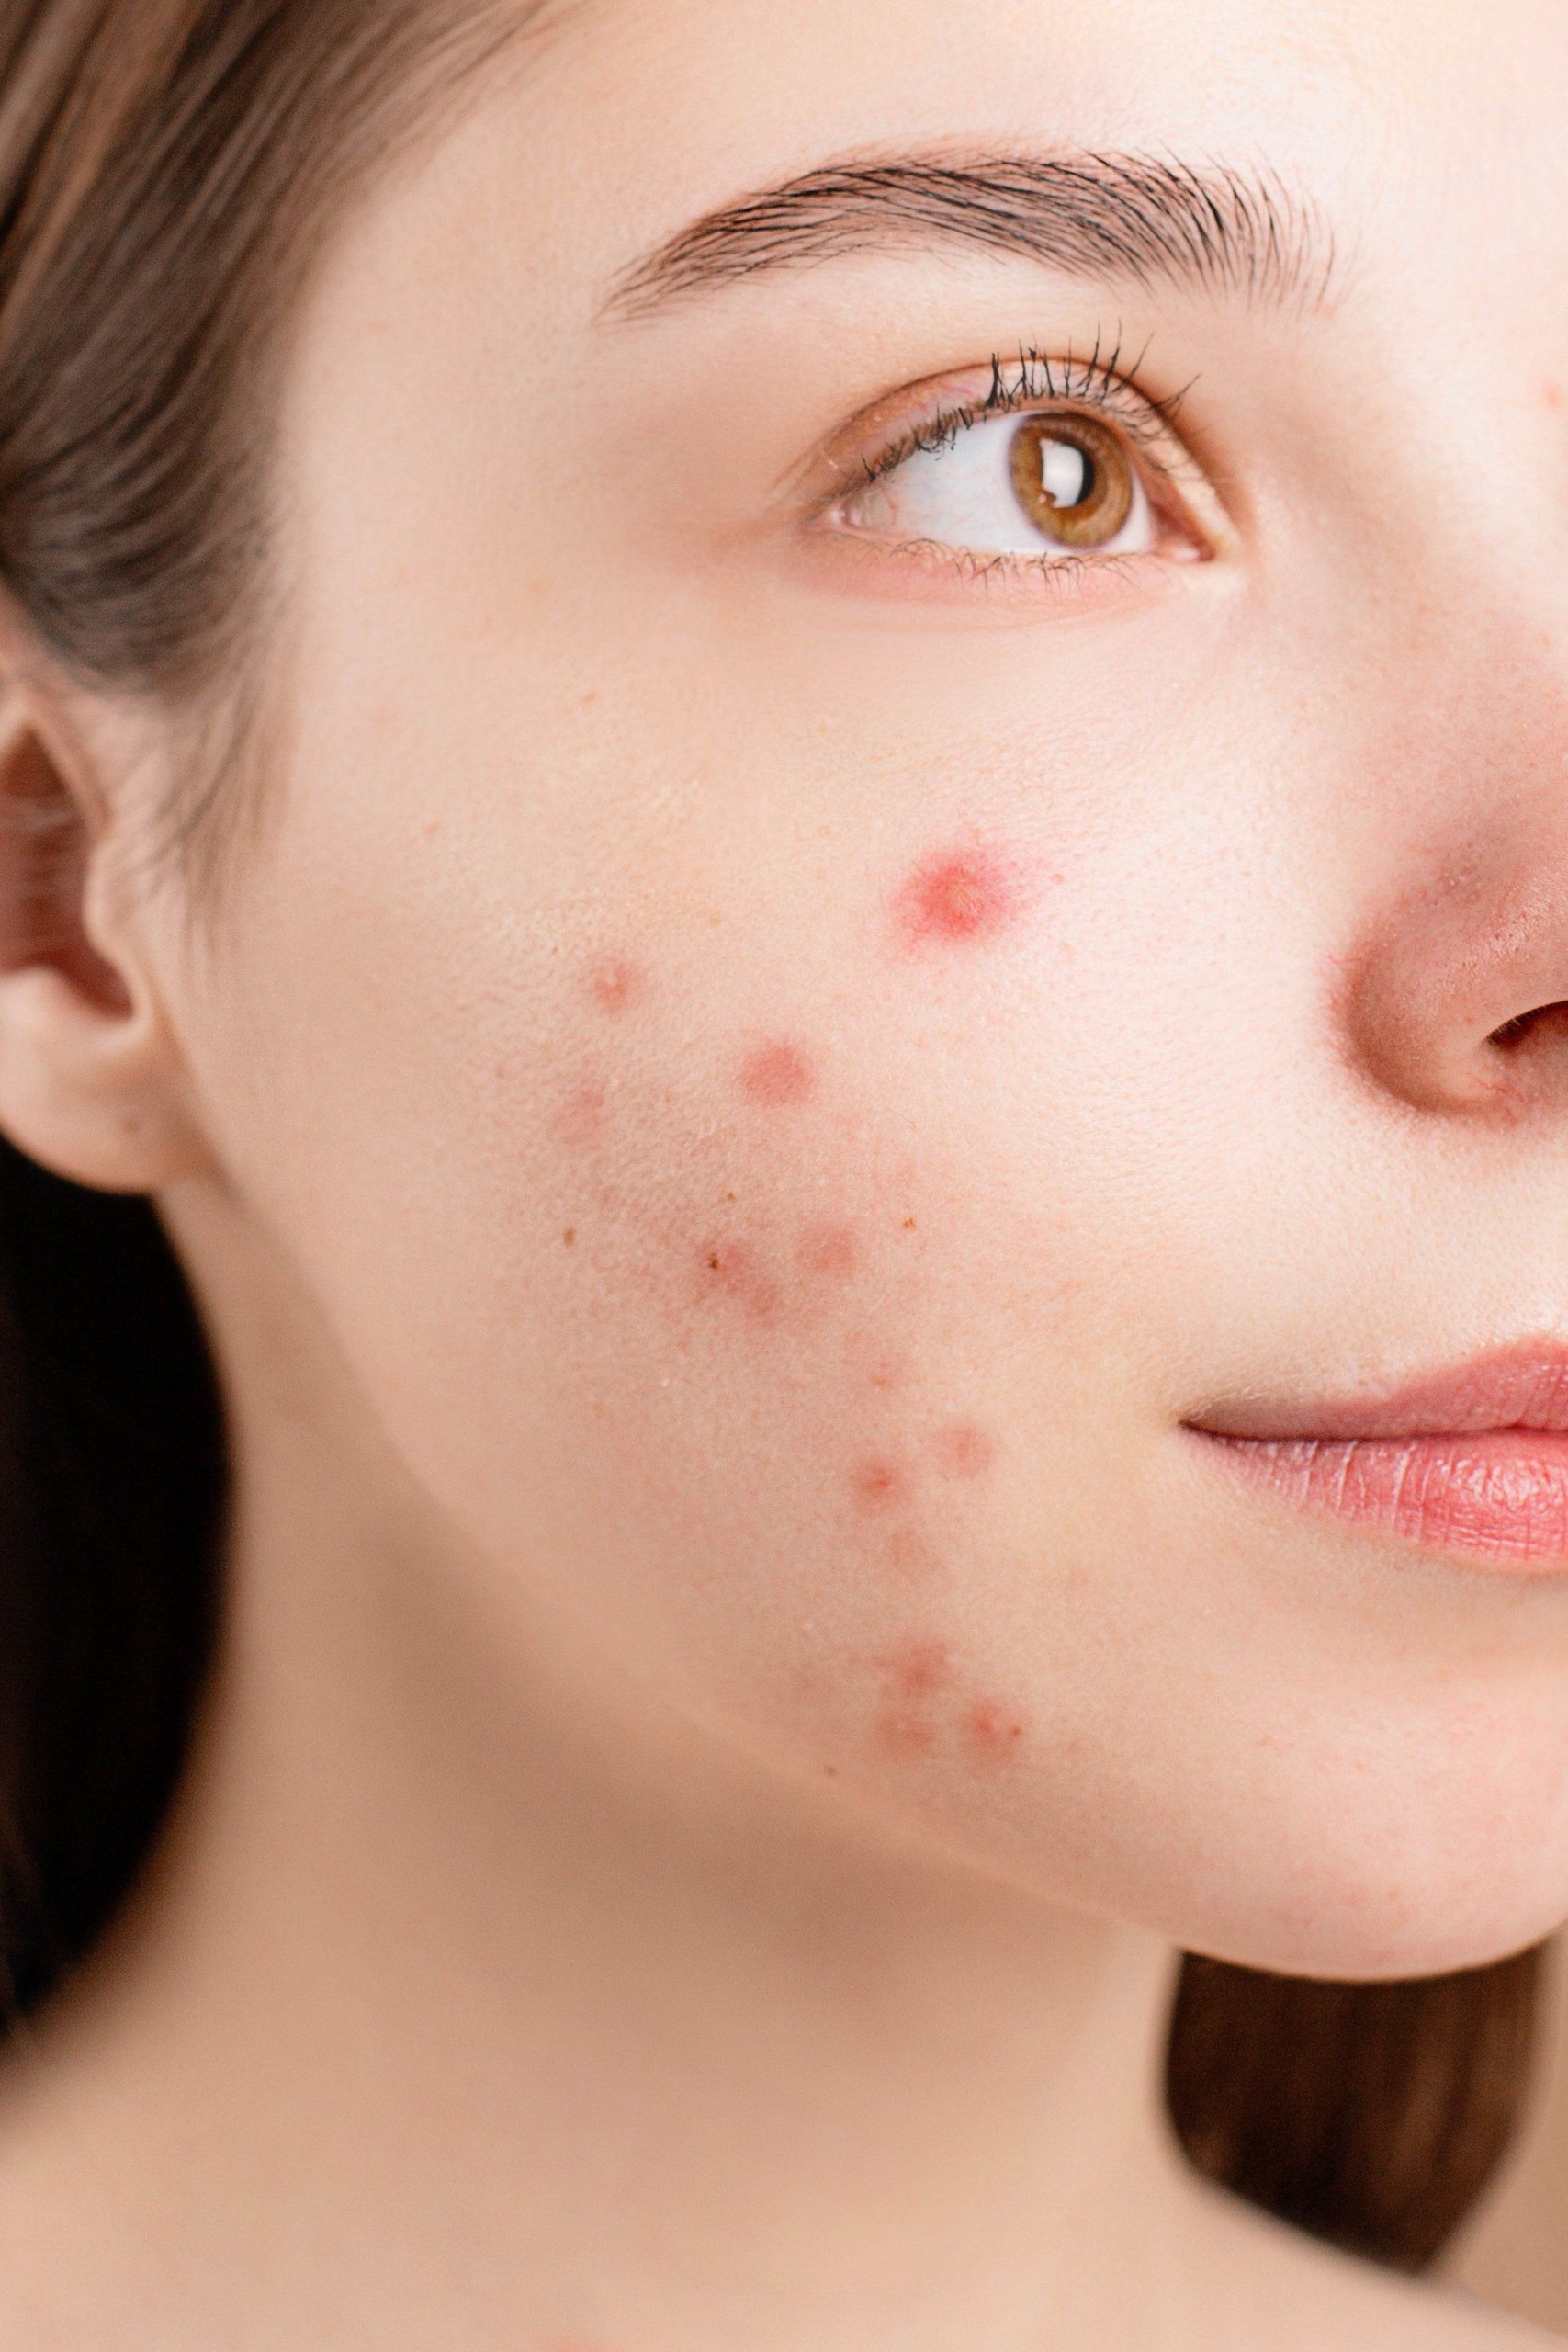 A young woman with adult acne on her cheeks.